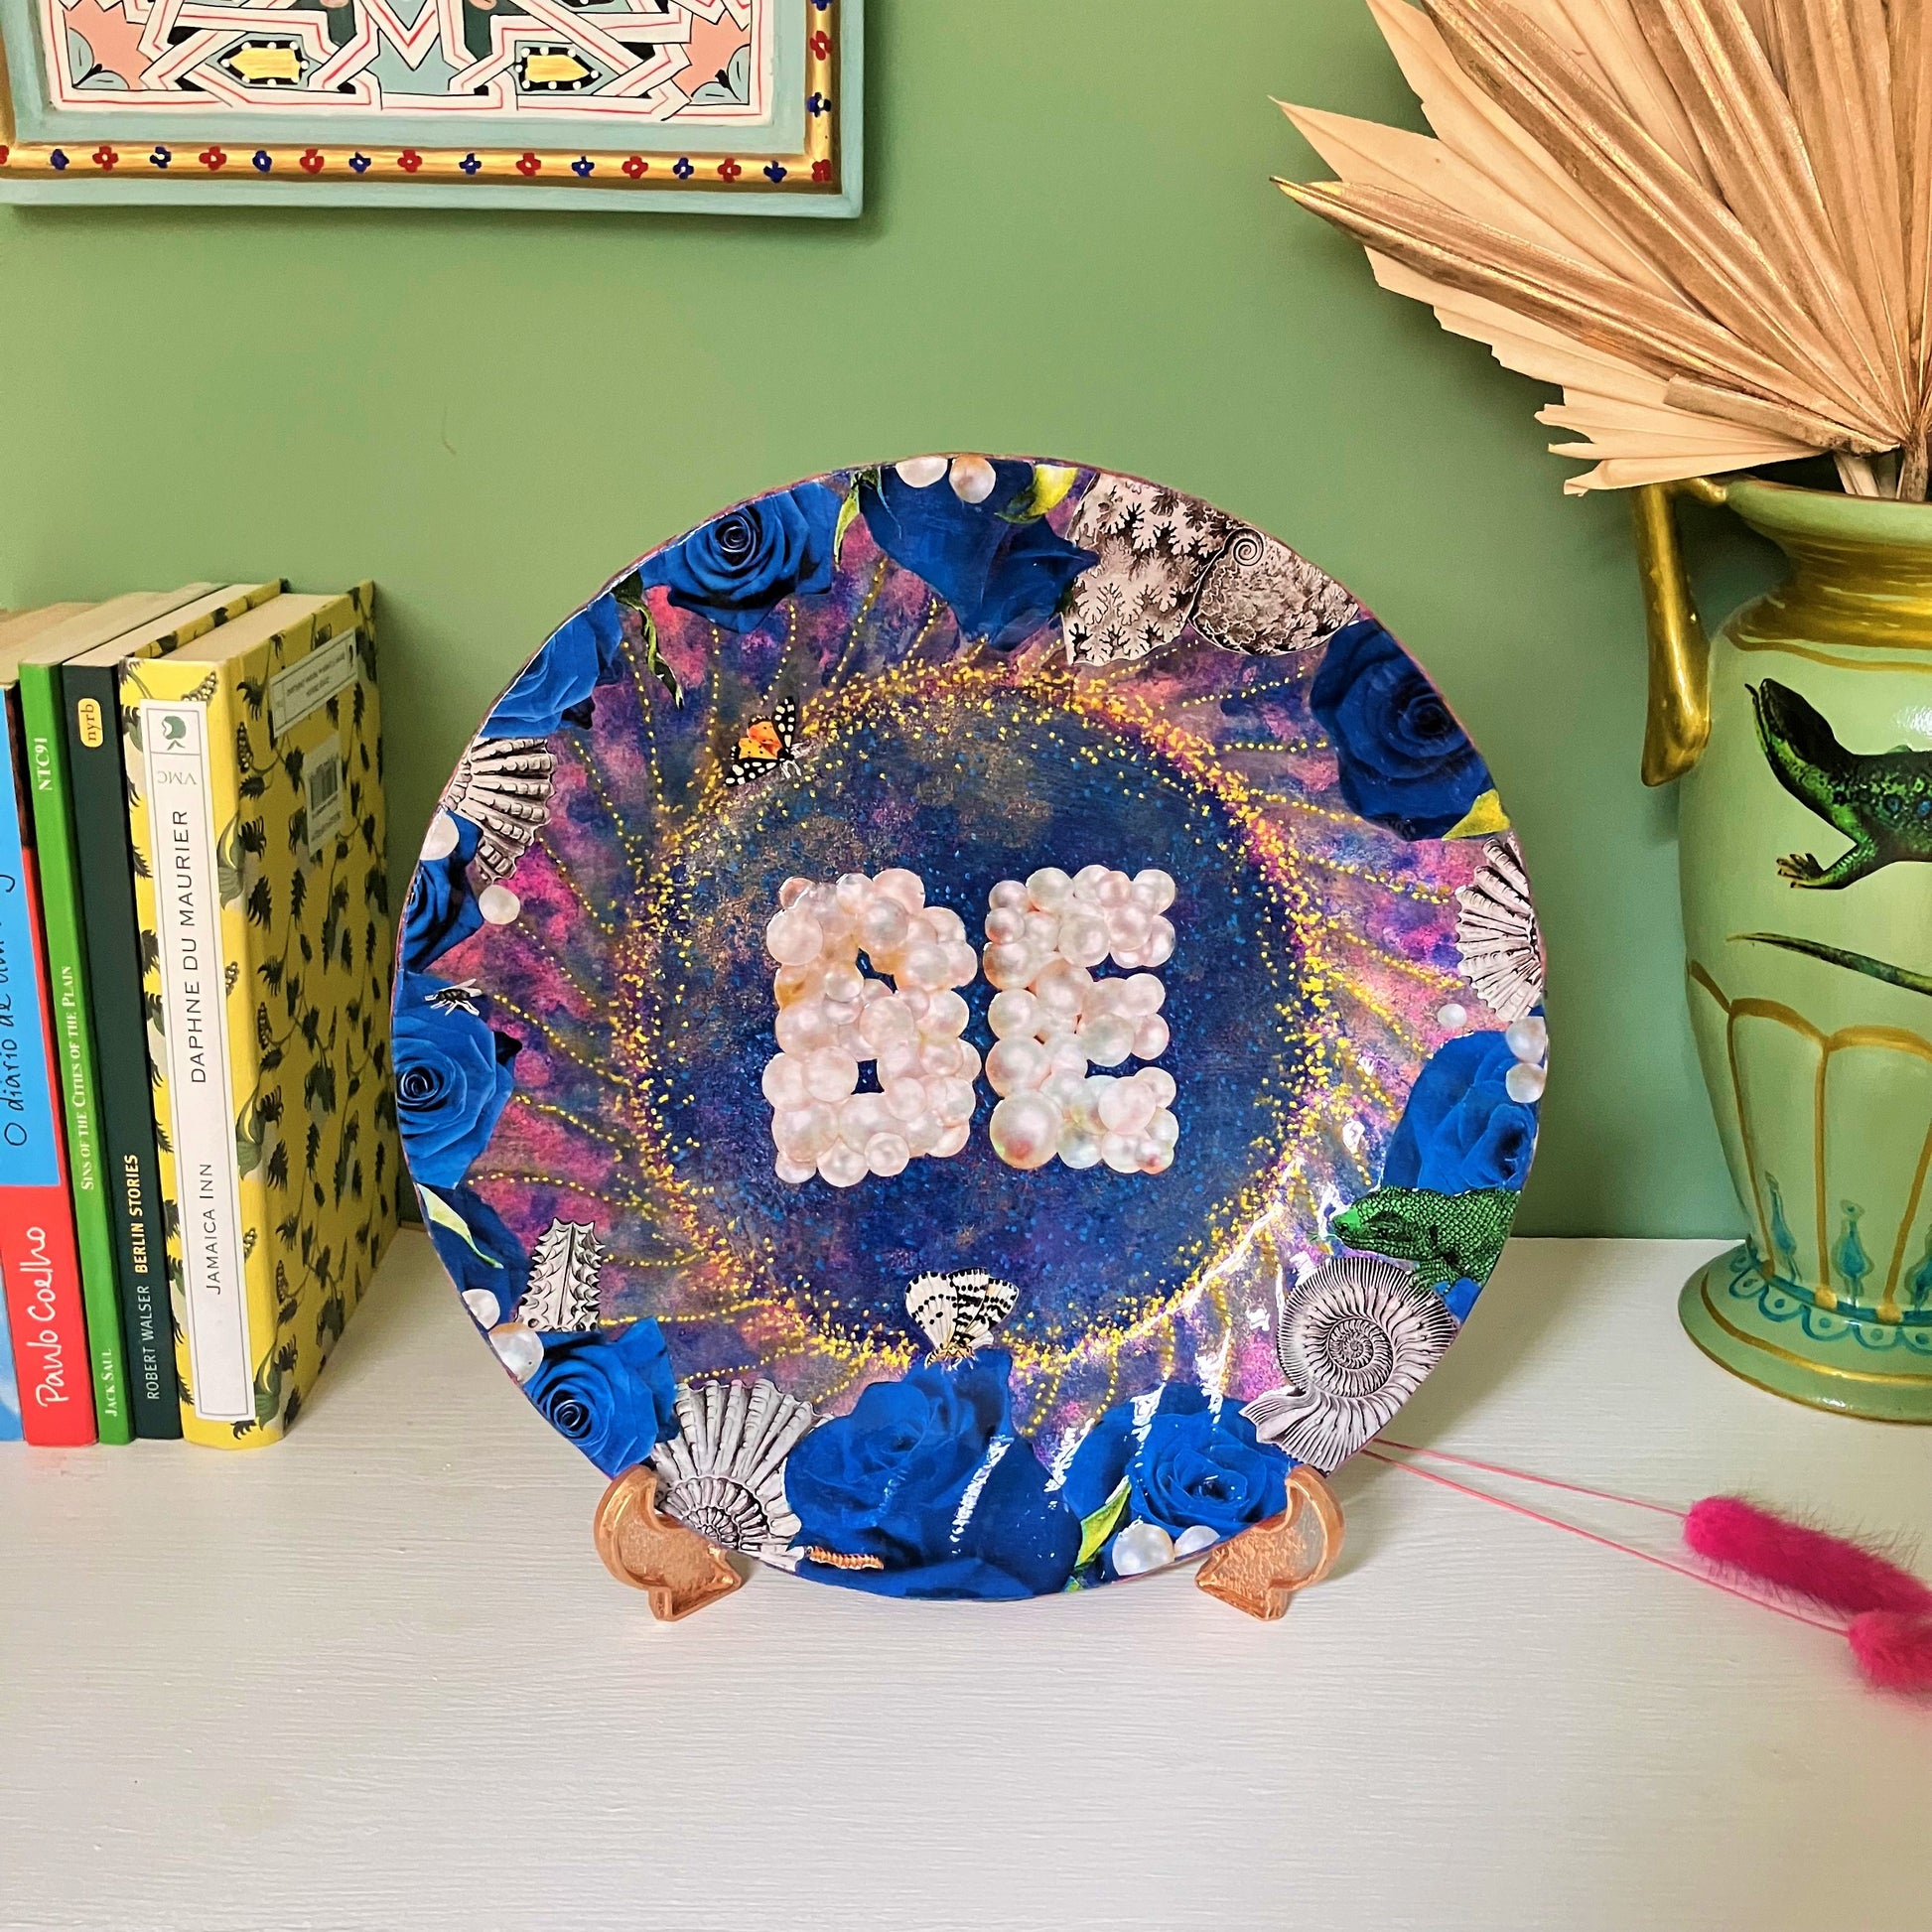 "Be" Wall Plate by House of Frisson. Featuring a collage of the word "Be" written with pearls, framed by blue roses, pearls, shells, and moths, on a blue background with golden details. Plate on a plate stand, resting on a shelf.